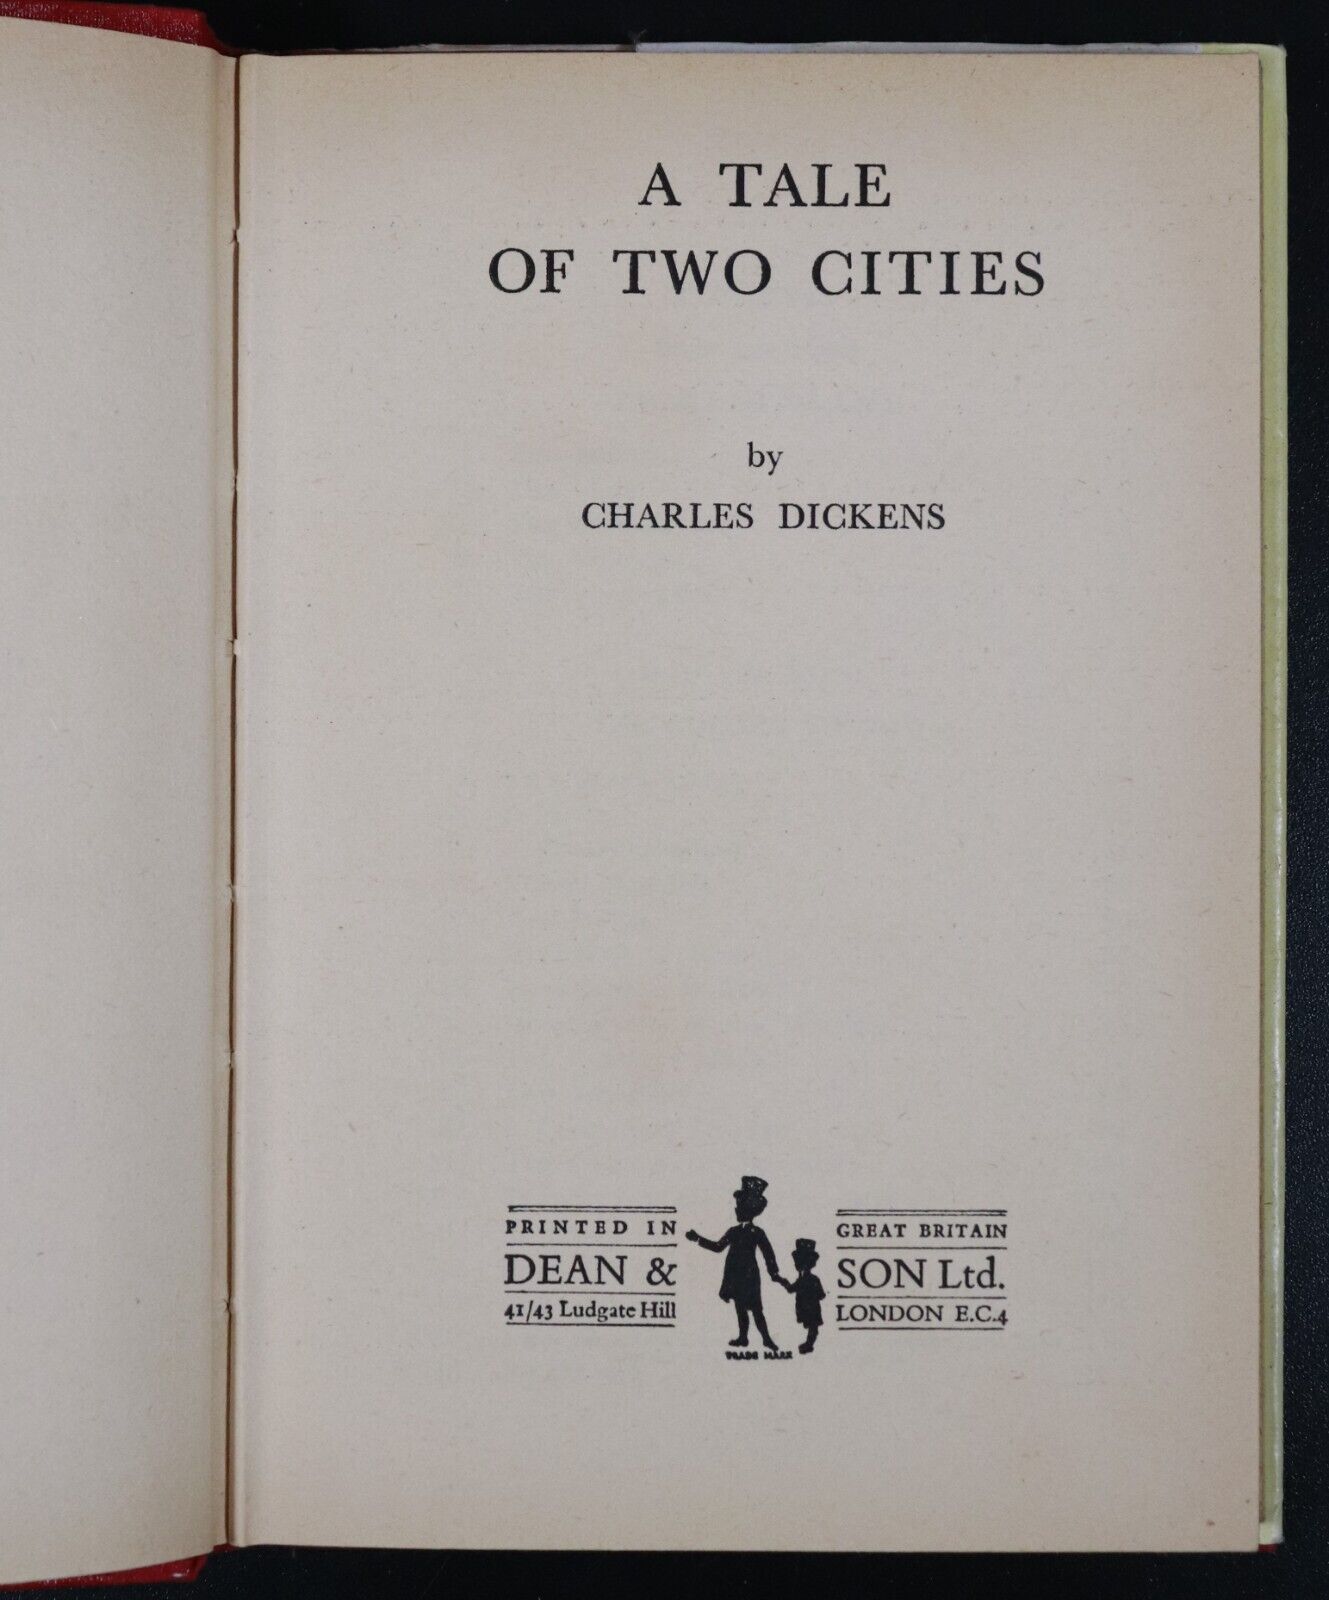 c1965 A Tale Of Two Cities by Charles Dickens Classic Fiction Book Dean & Son